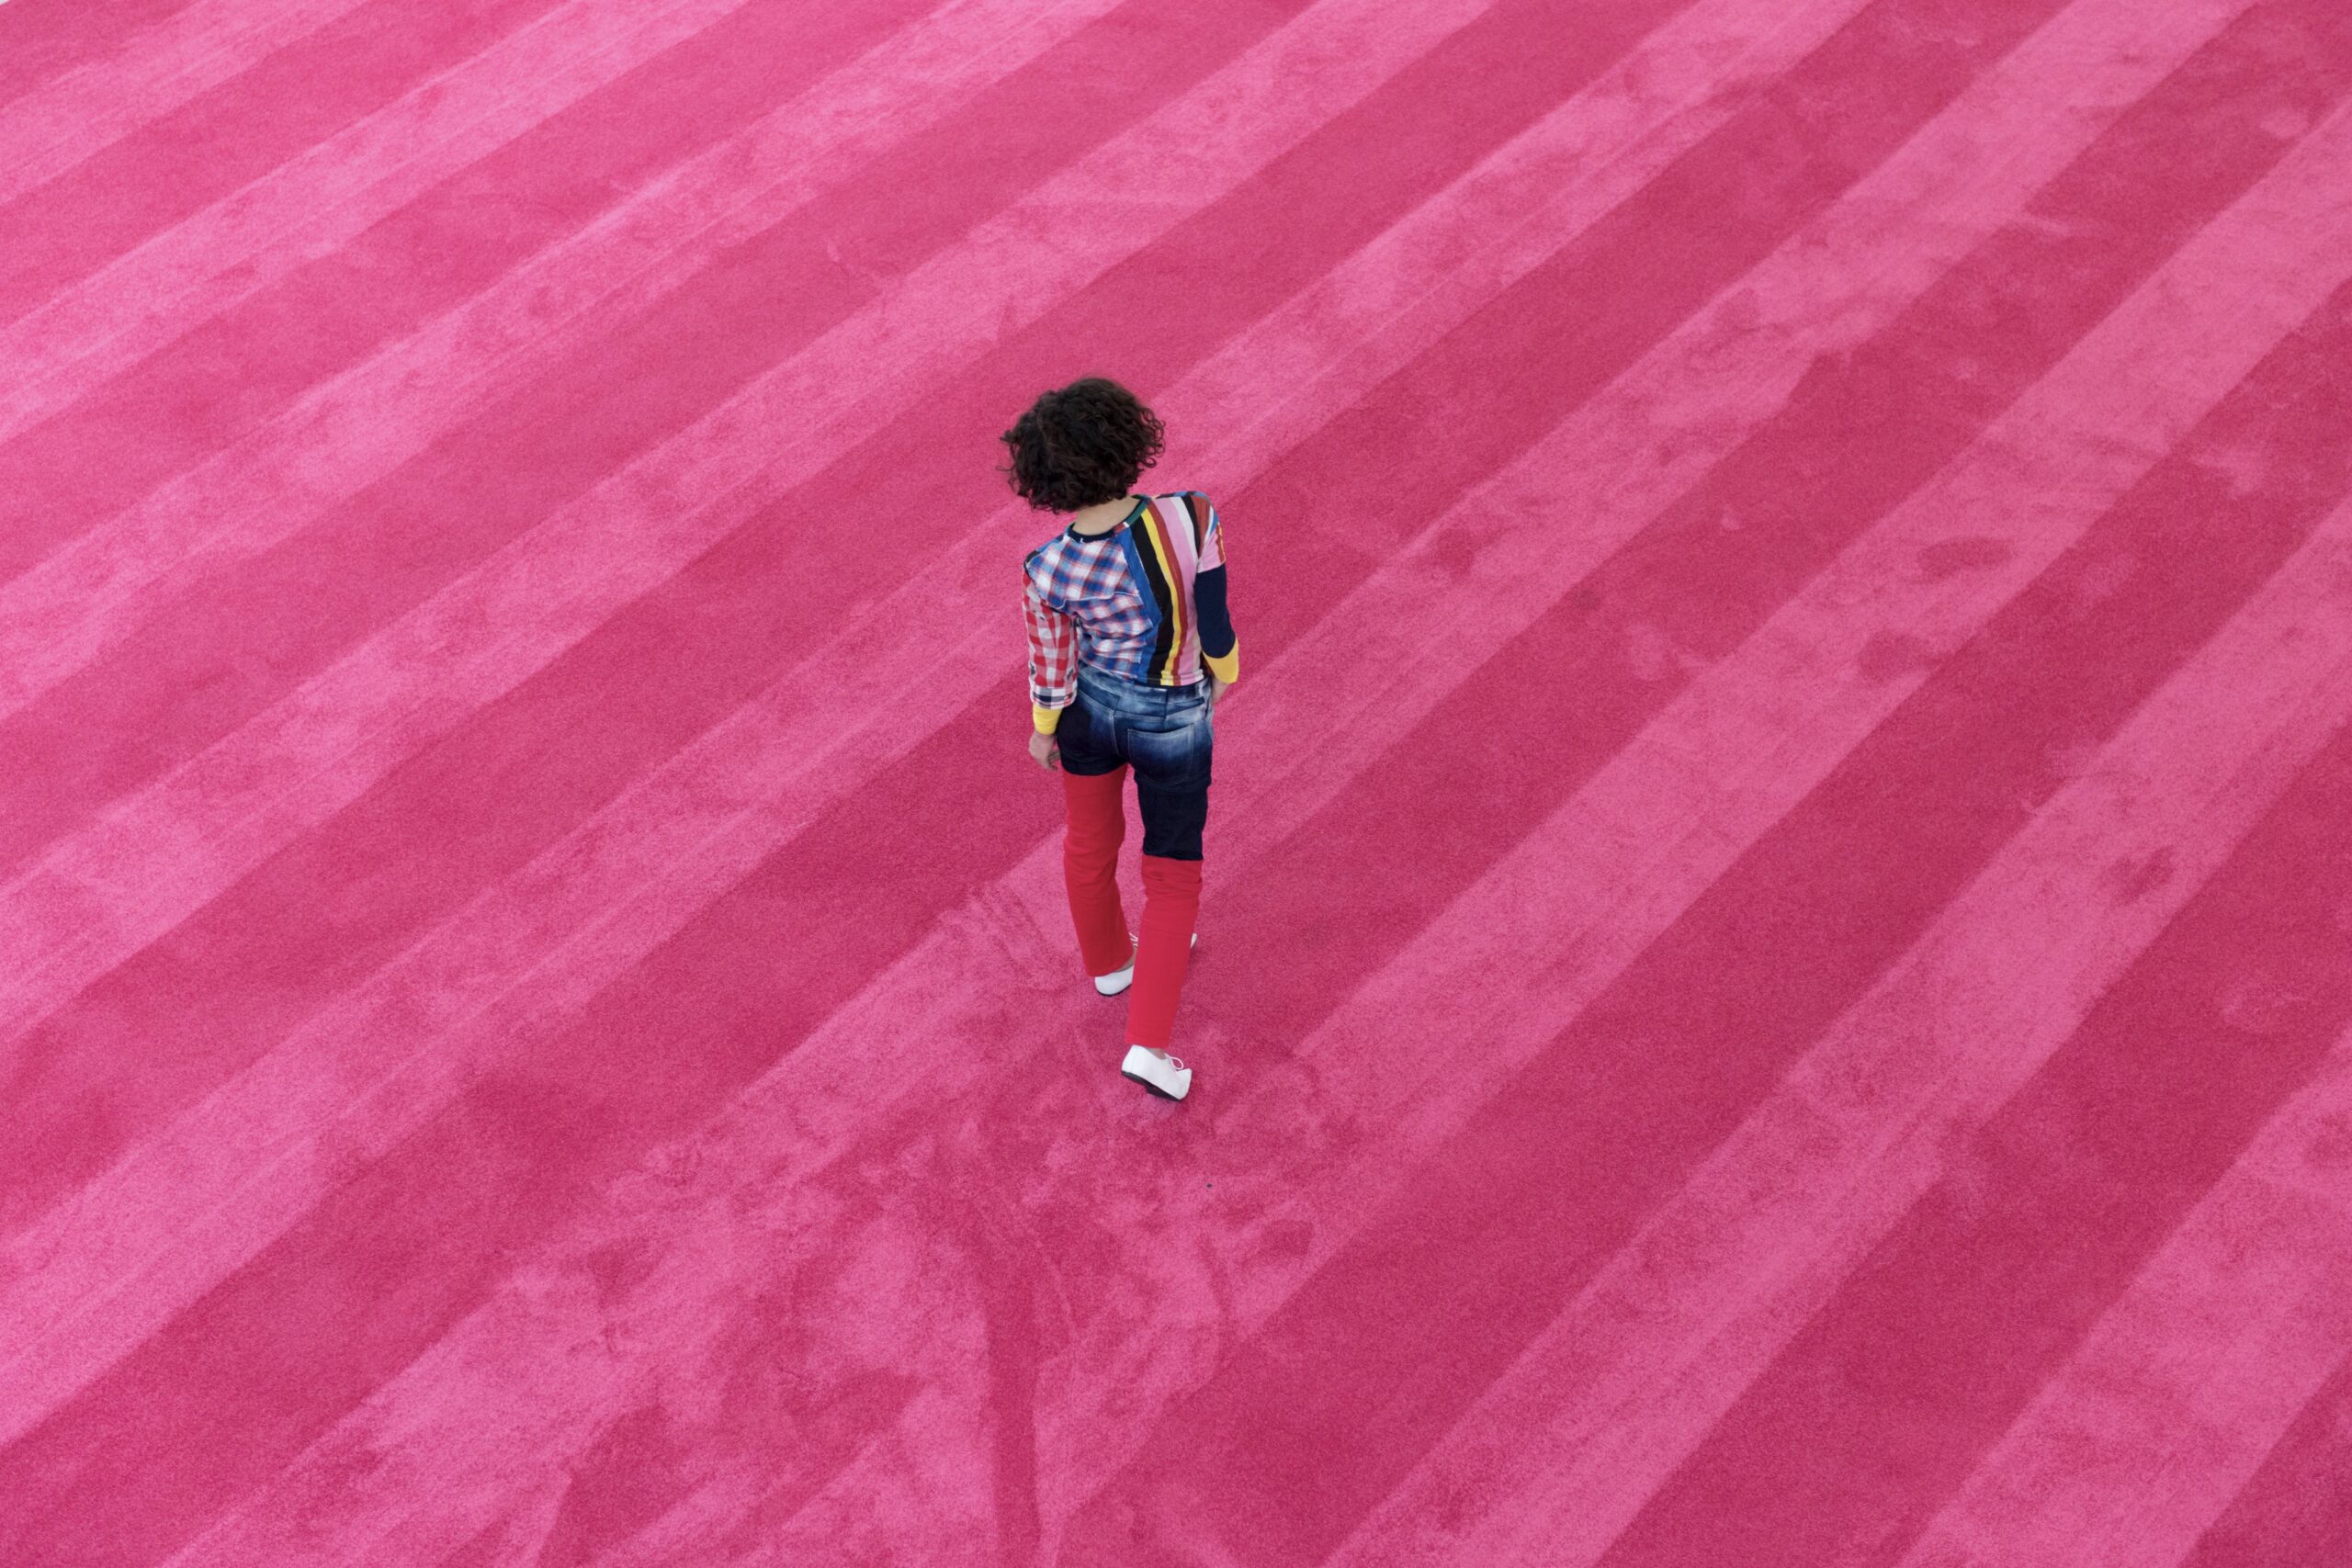 A performer wearing multi-coloured clothing in a variety of patterns and fabrics -- plaid, stripes, and denim -- walks across a striped pink carpet.